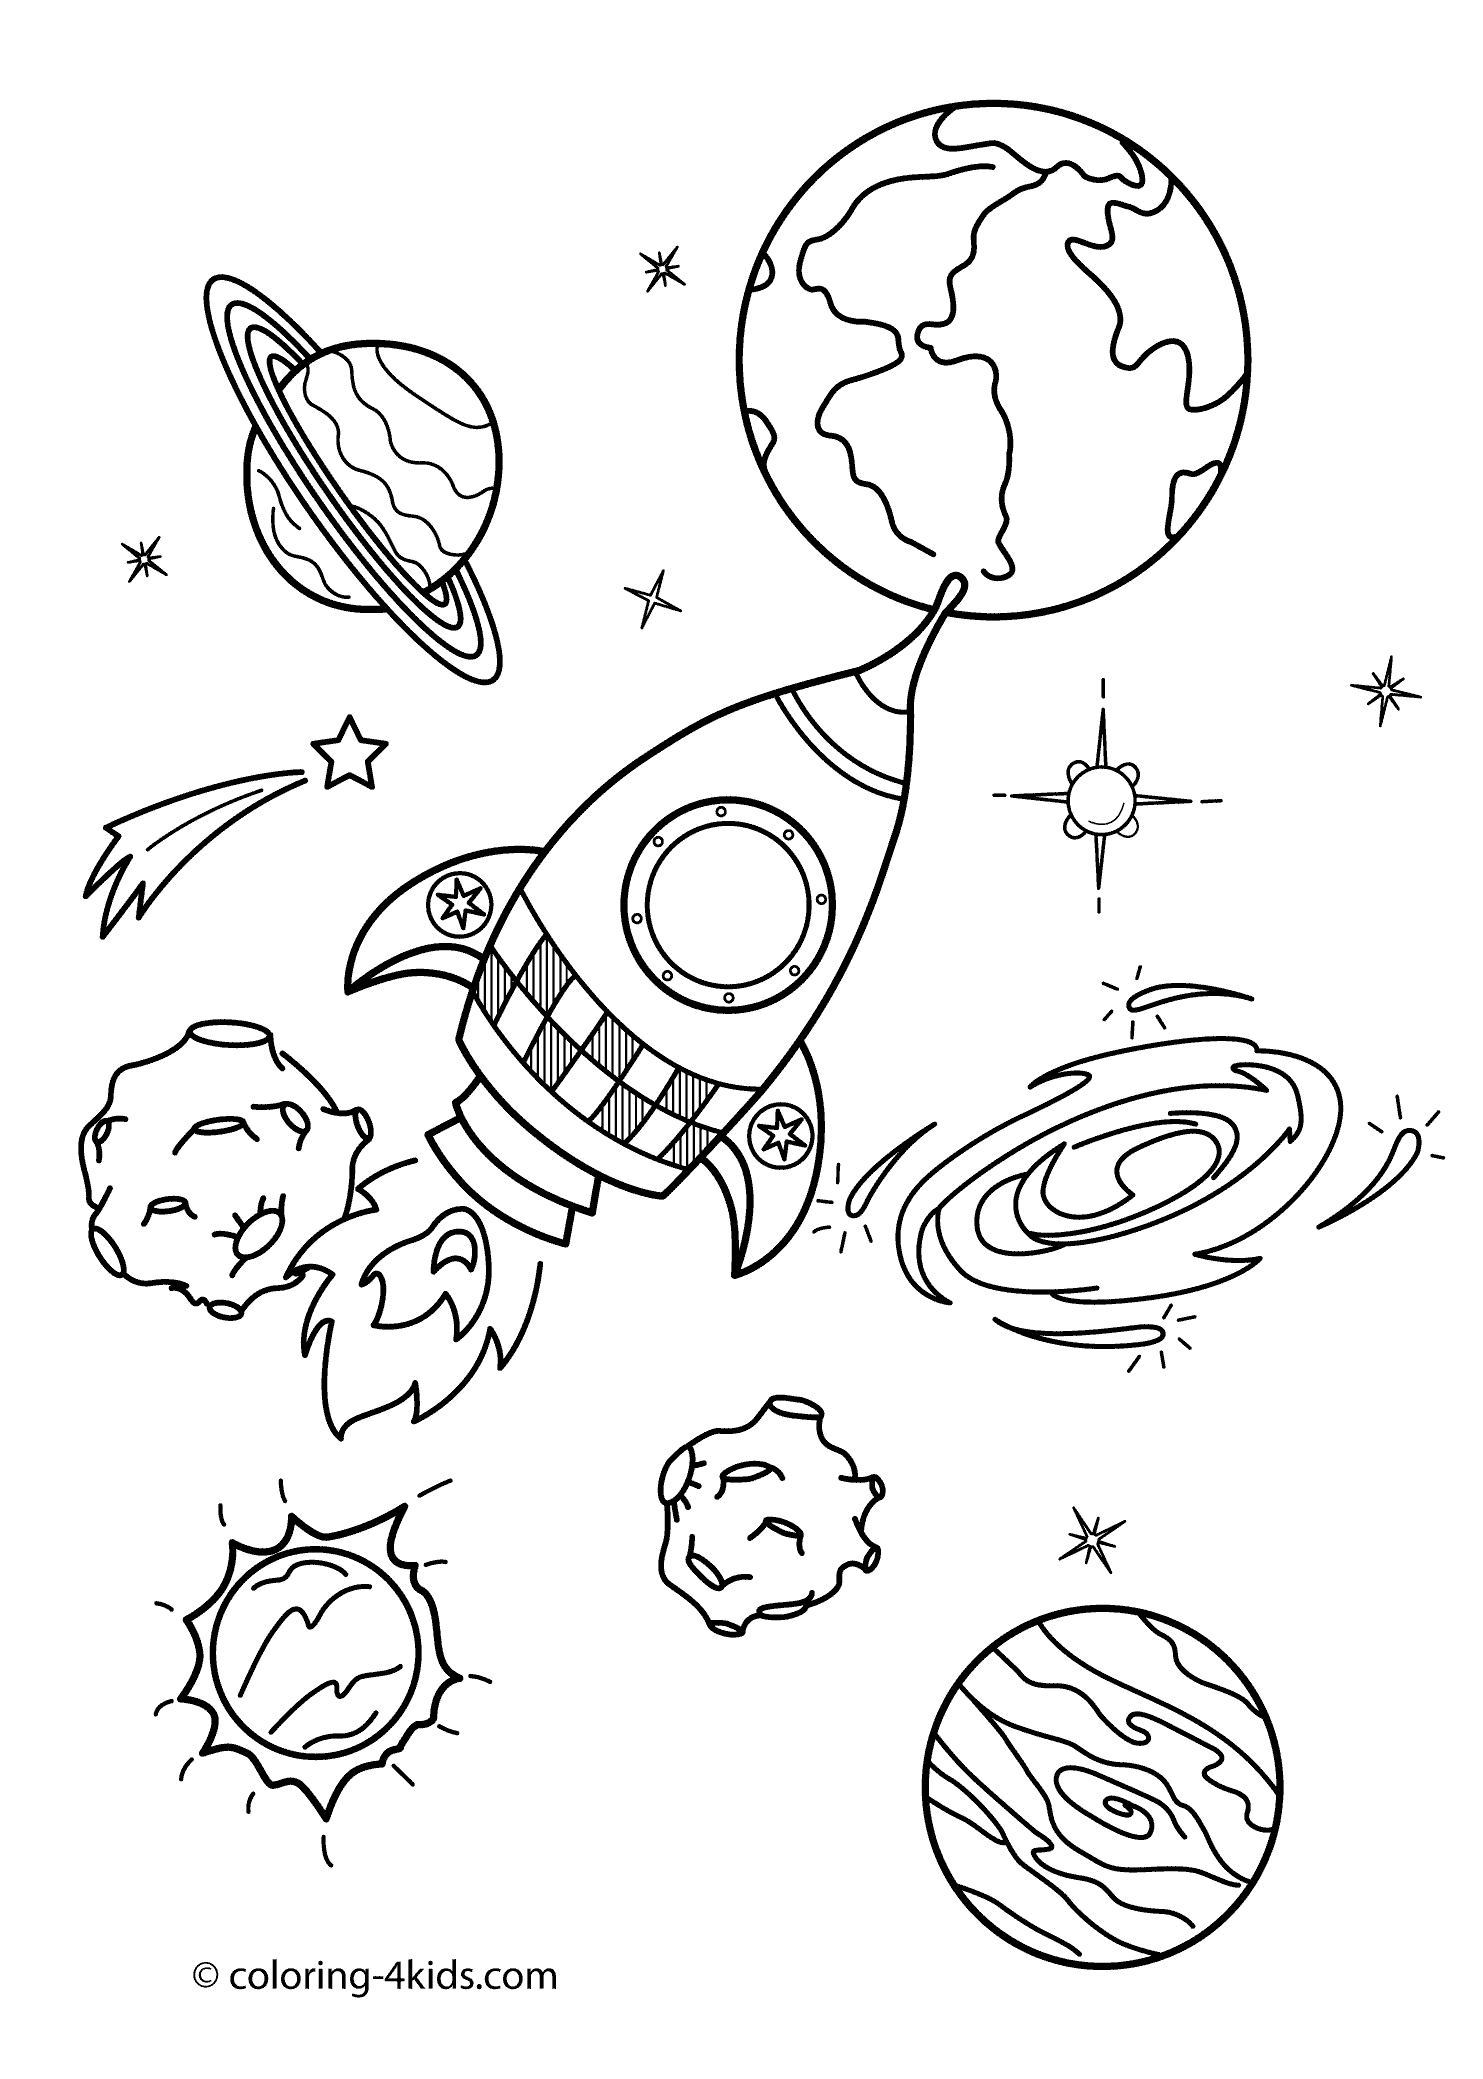 space coloring pages free printable space coloring pages to download and print for free coloring space free printable pages 